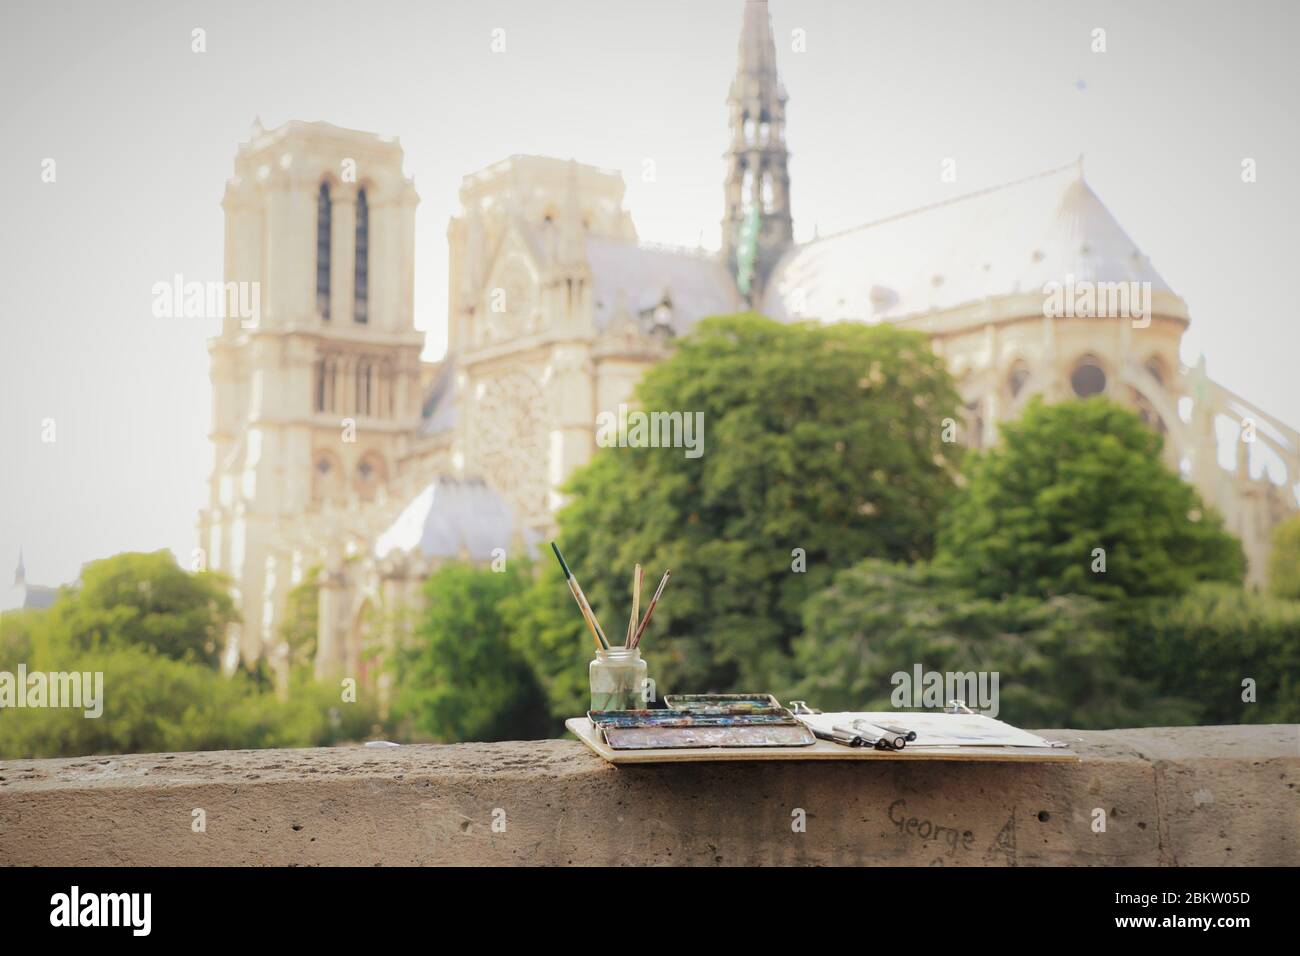 A Painter's Tools, Along the Seine Overlooking the Notre Dame. Paris. Stock Photo